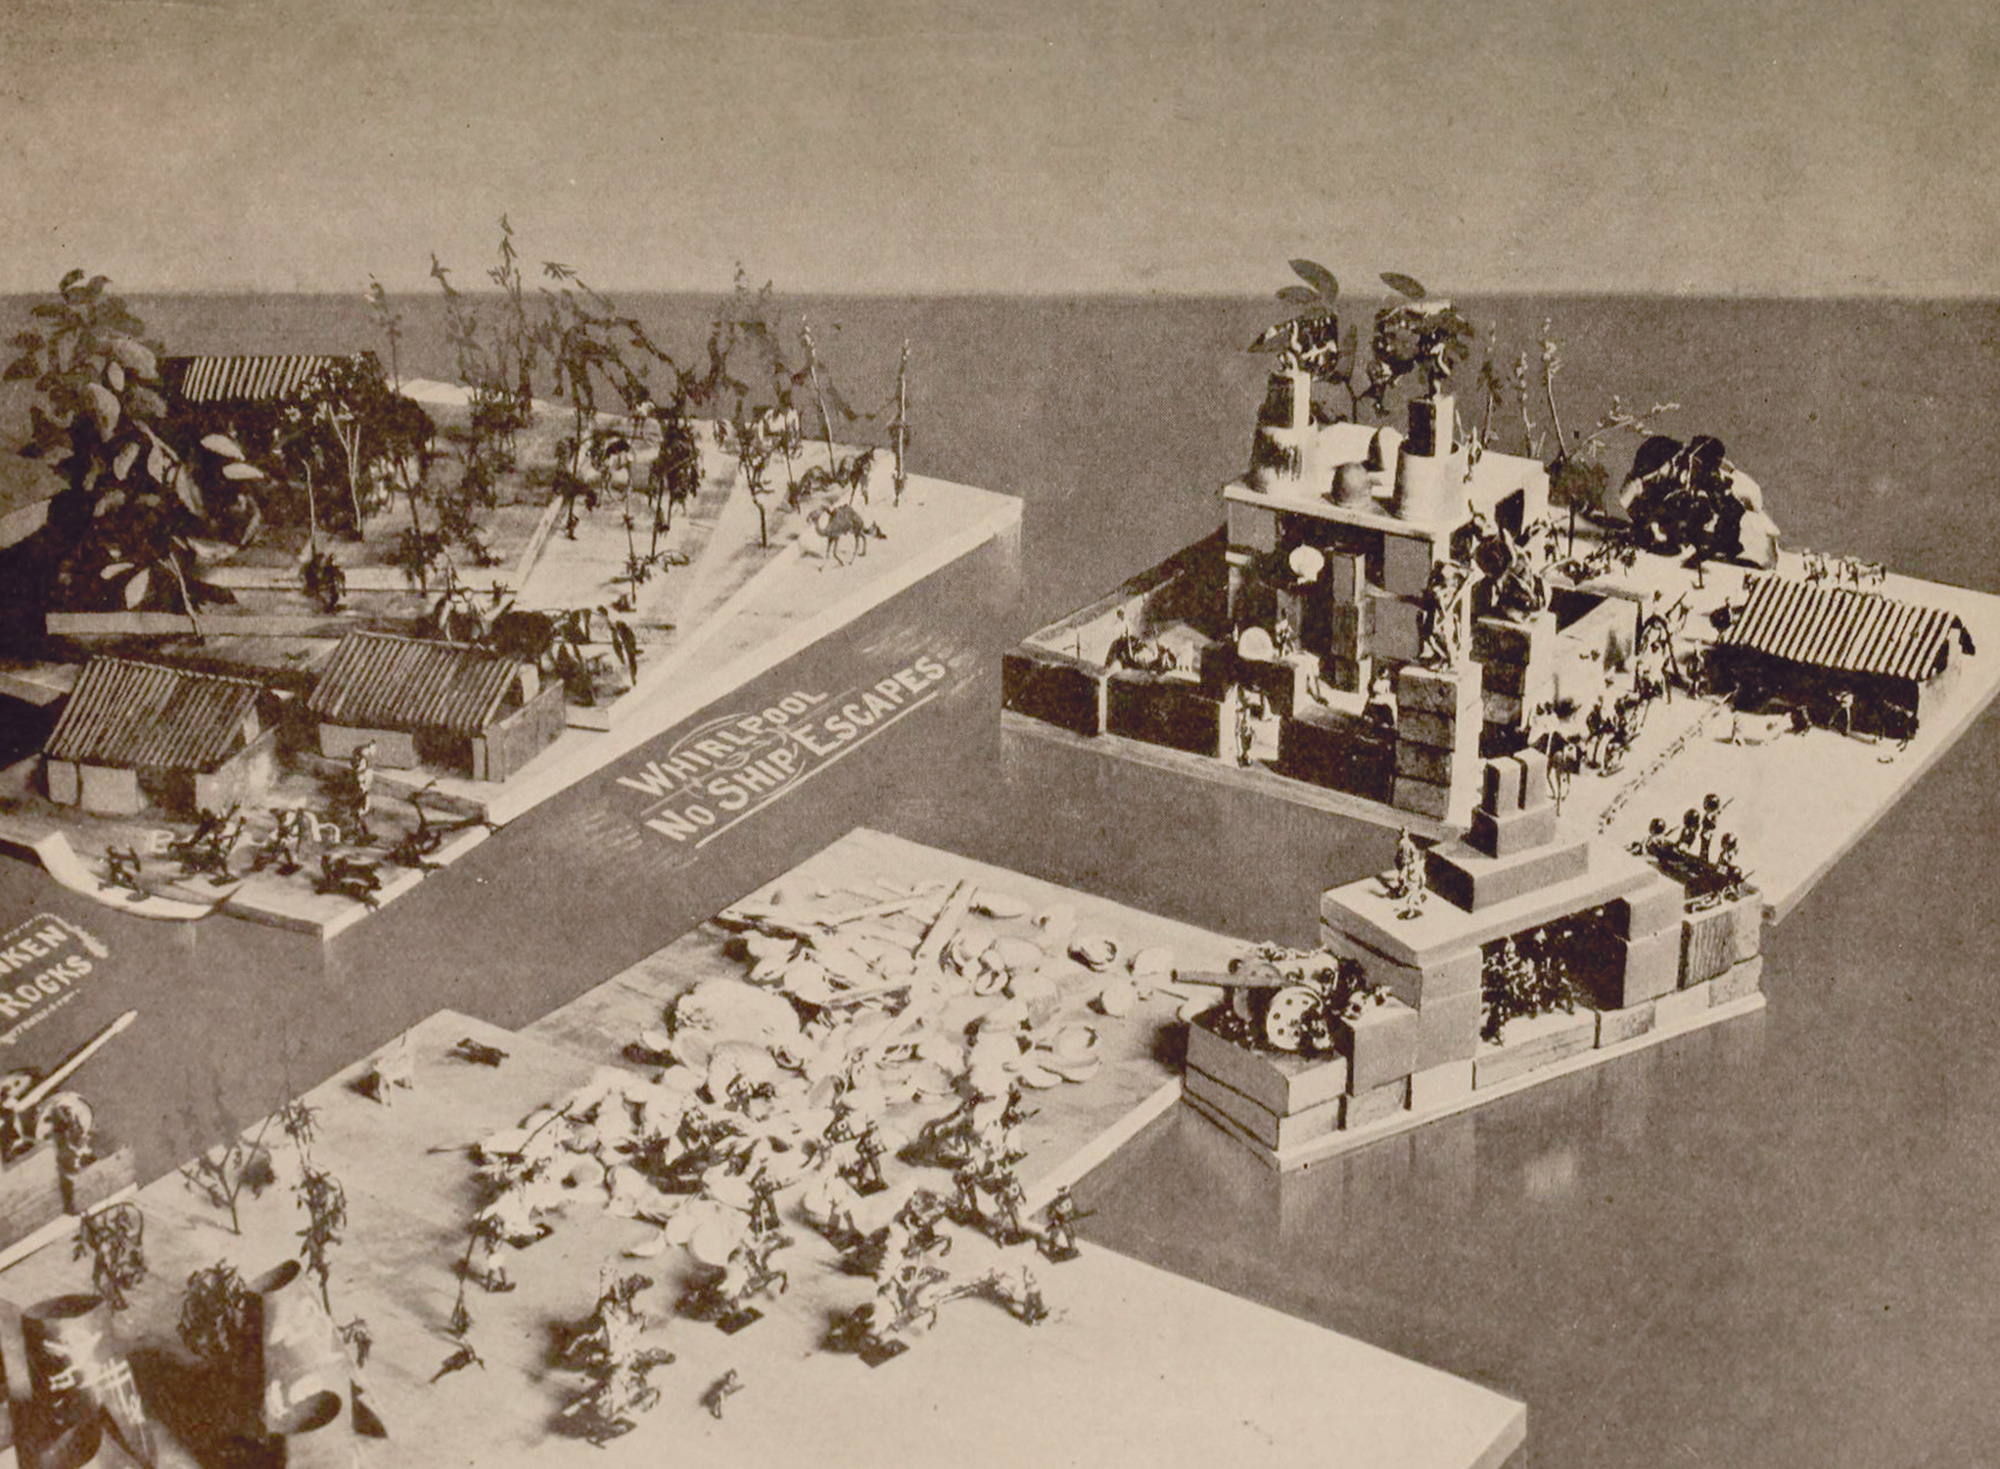 A photograph taken by H. G. Wells from the nineteen twelve edition of his “Floor Games.” It depicts “the Island of the Temple and the invasion of the Indians’ territory by Captain G.P.W.” 